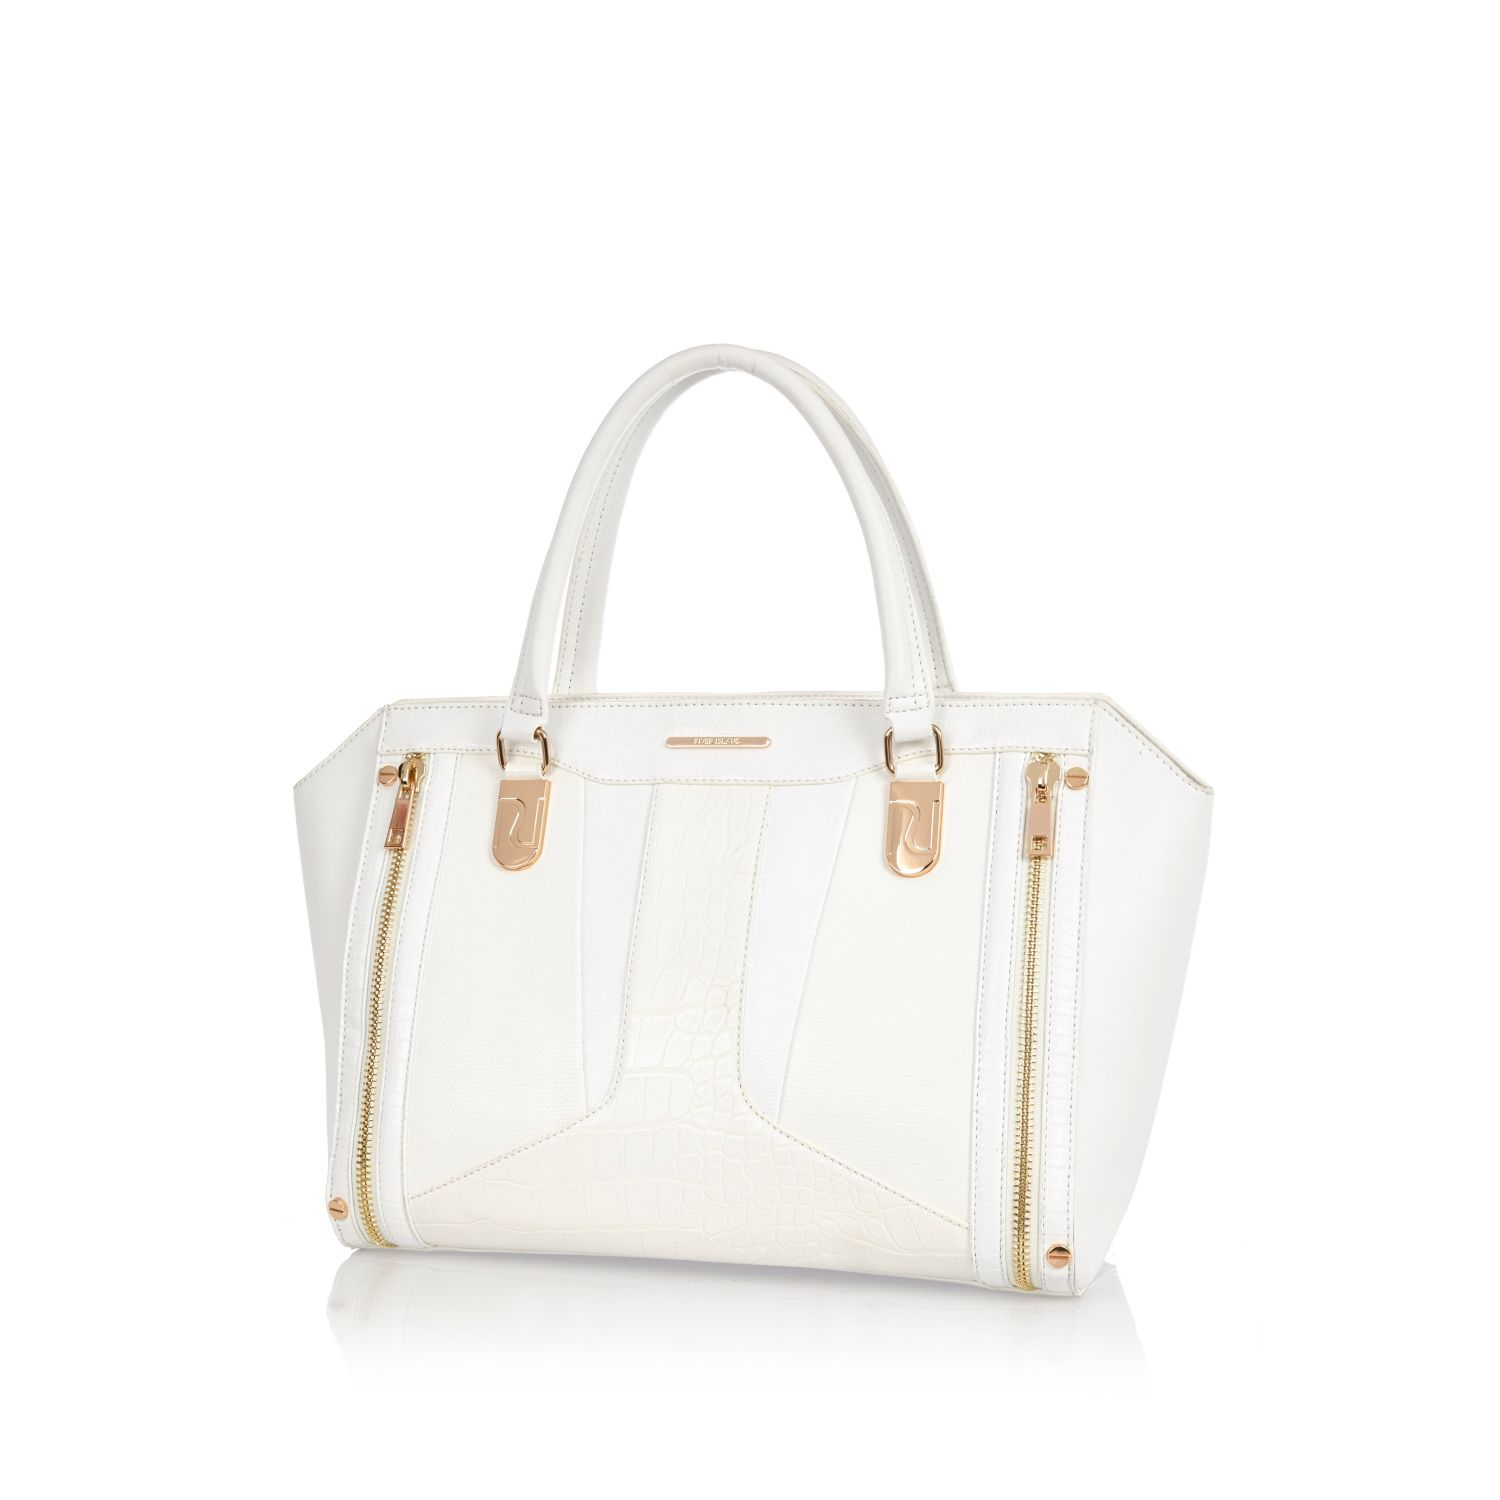 River Island White Contrast Panel Structured Tote Bag in White | Lyst